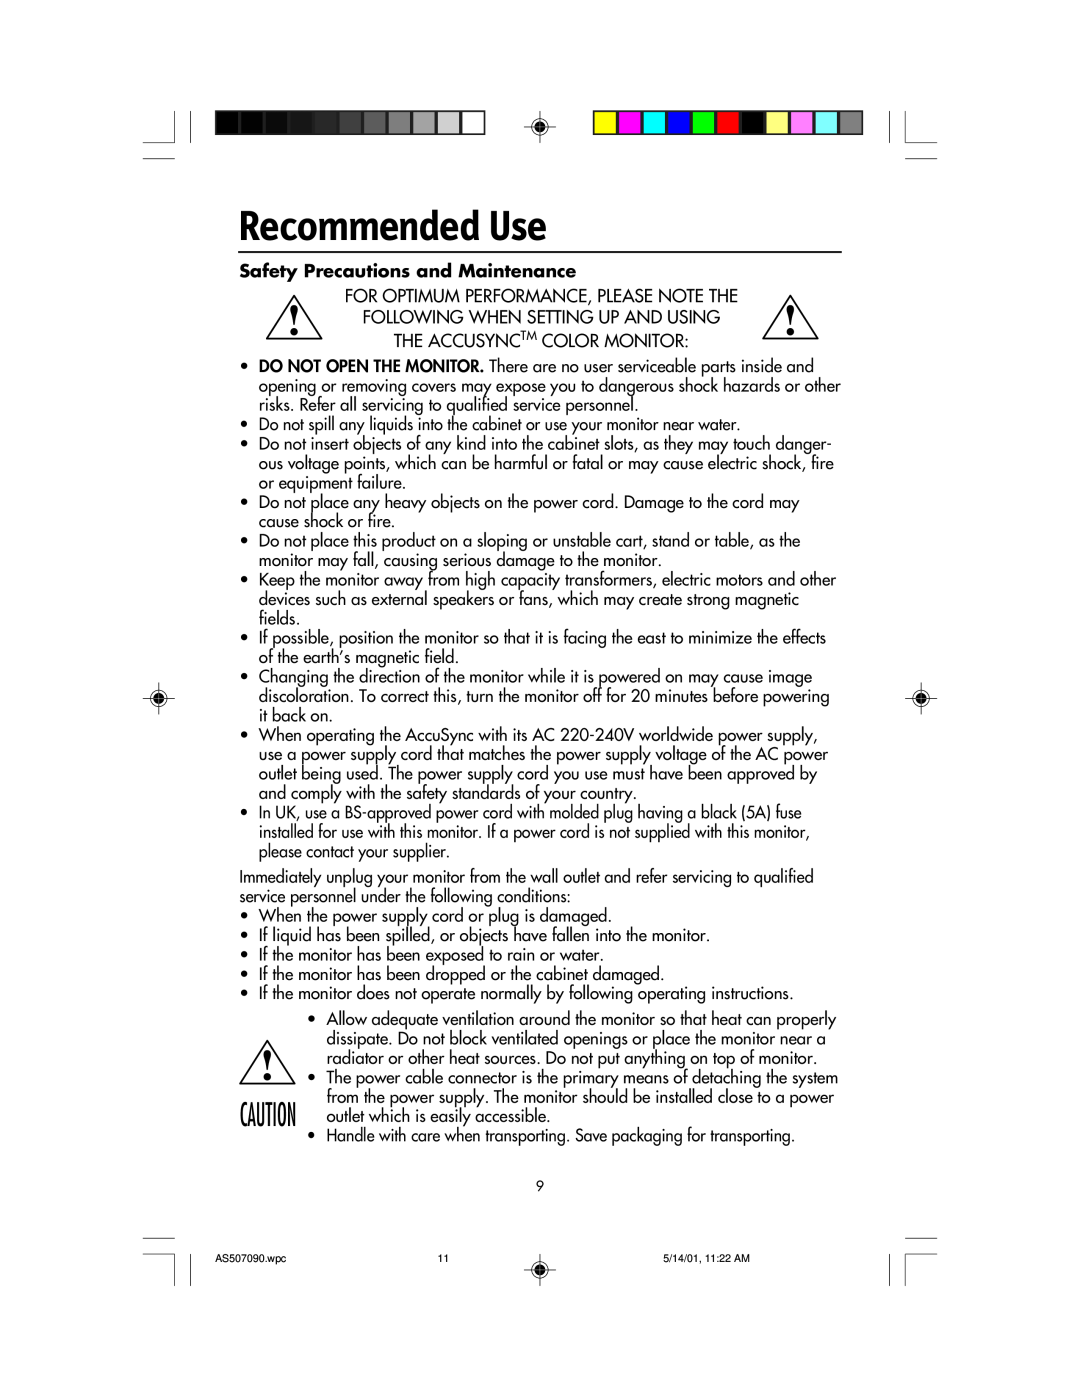 NEC AccuSync 50, AccuSync 90, AccuSync 70 user manual Recommended Use, Safety Precautions and Maintenance 